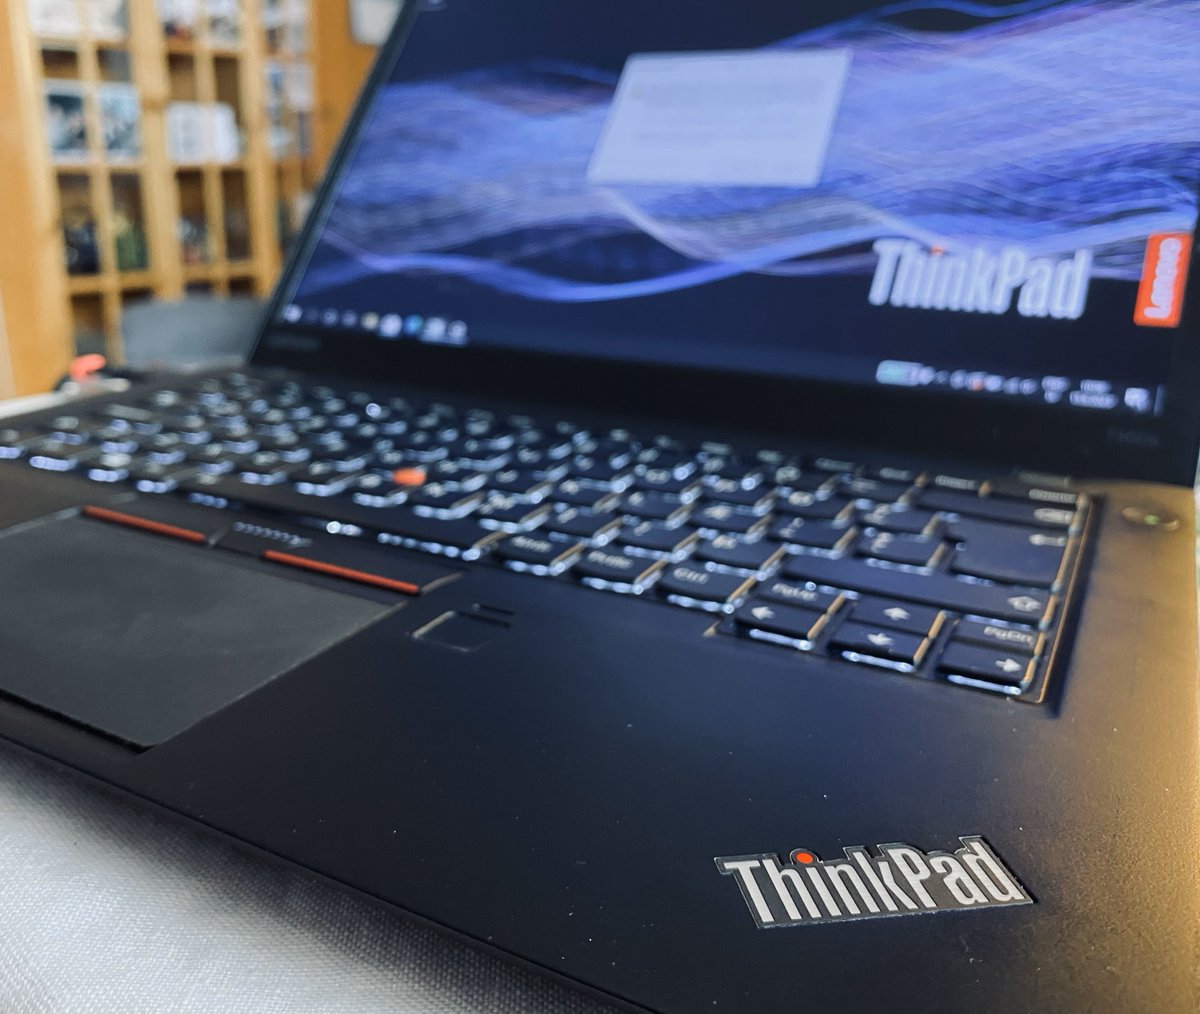 Got a visitor on this #ThinkPadThursday, a lovely #ThinkPad T460s that needed some TLC. Complete refresh and it's good for at least 5 more years. 😊🤓💪🇮🇸 @Lenovo @LenovoThinkPad #NeedMoreThinkPads #LenovoIN